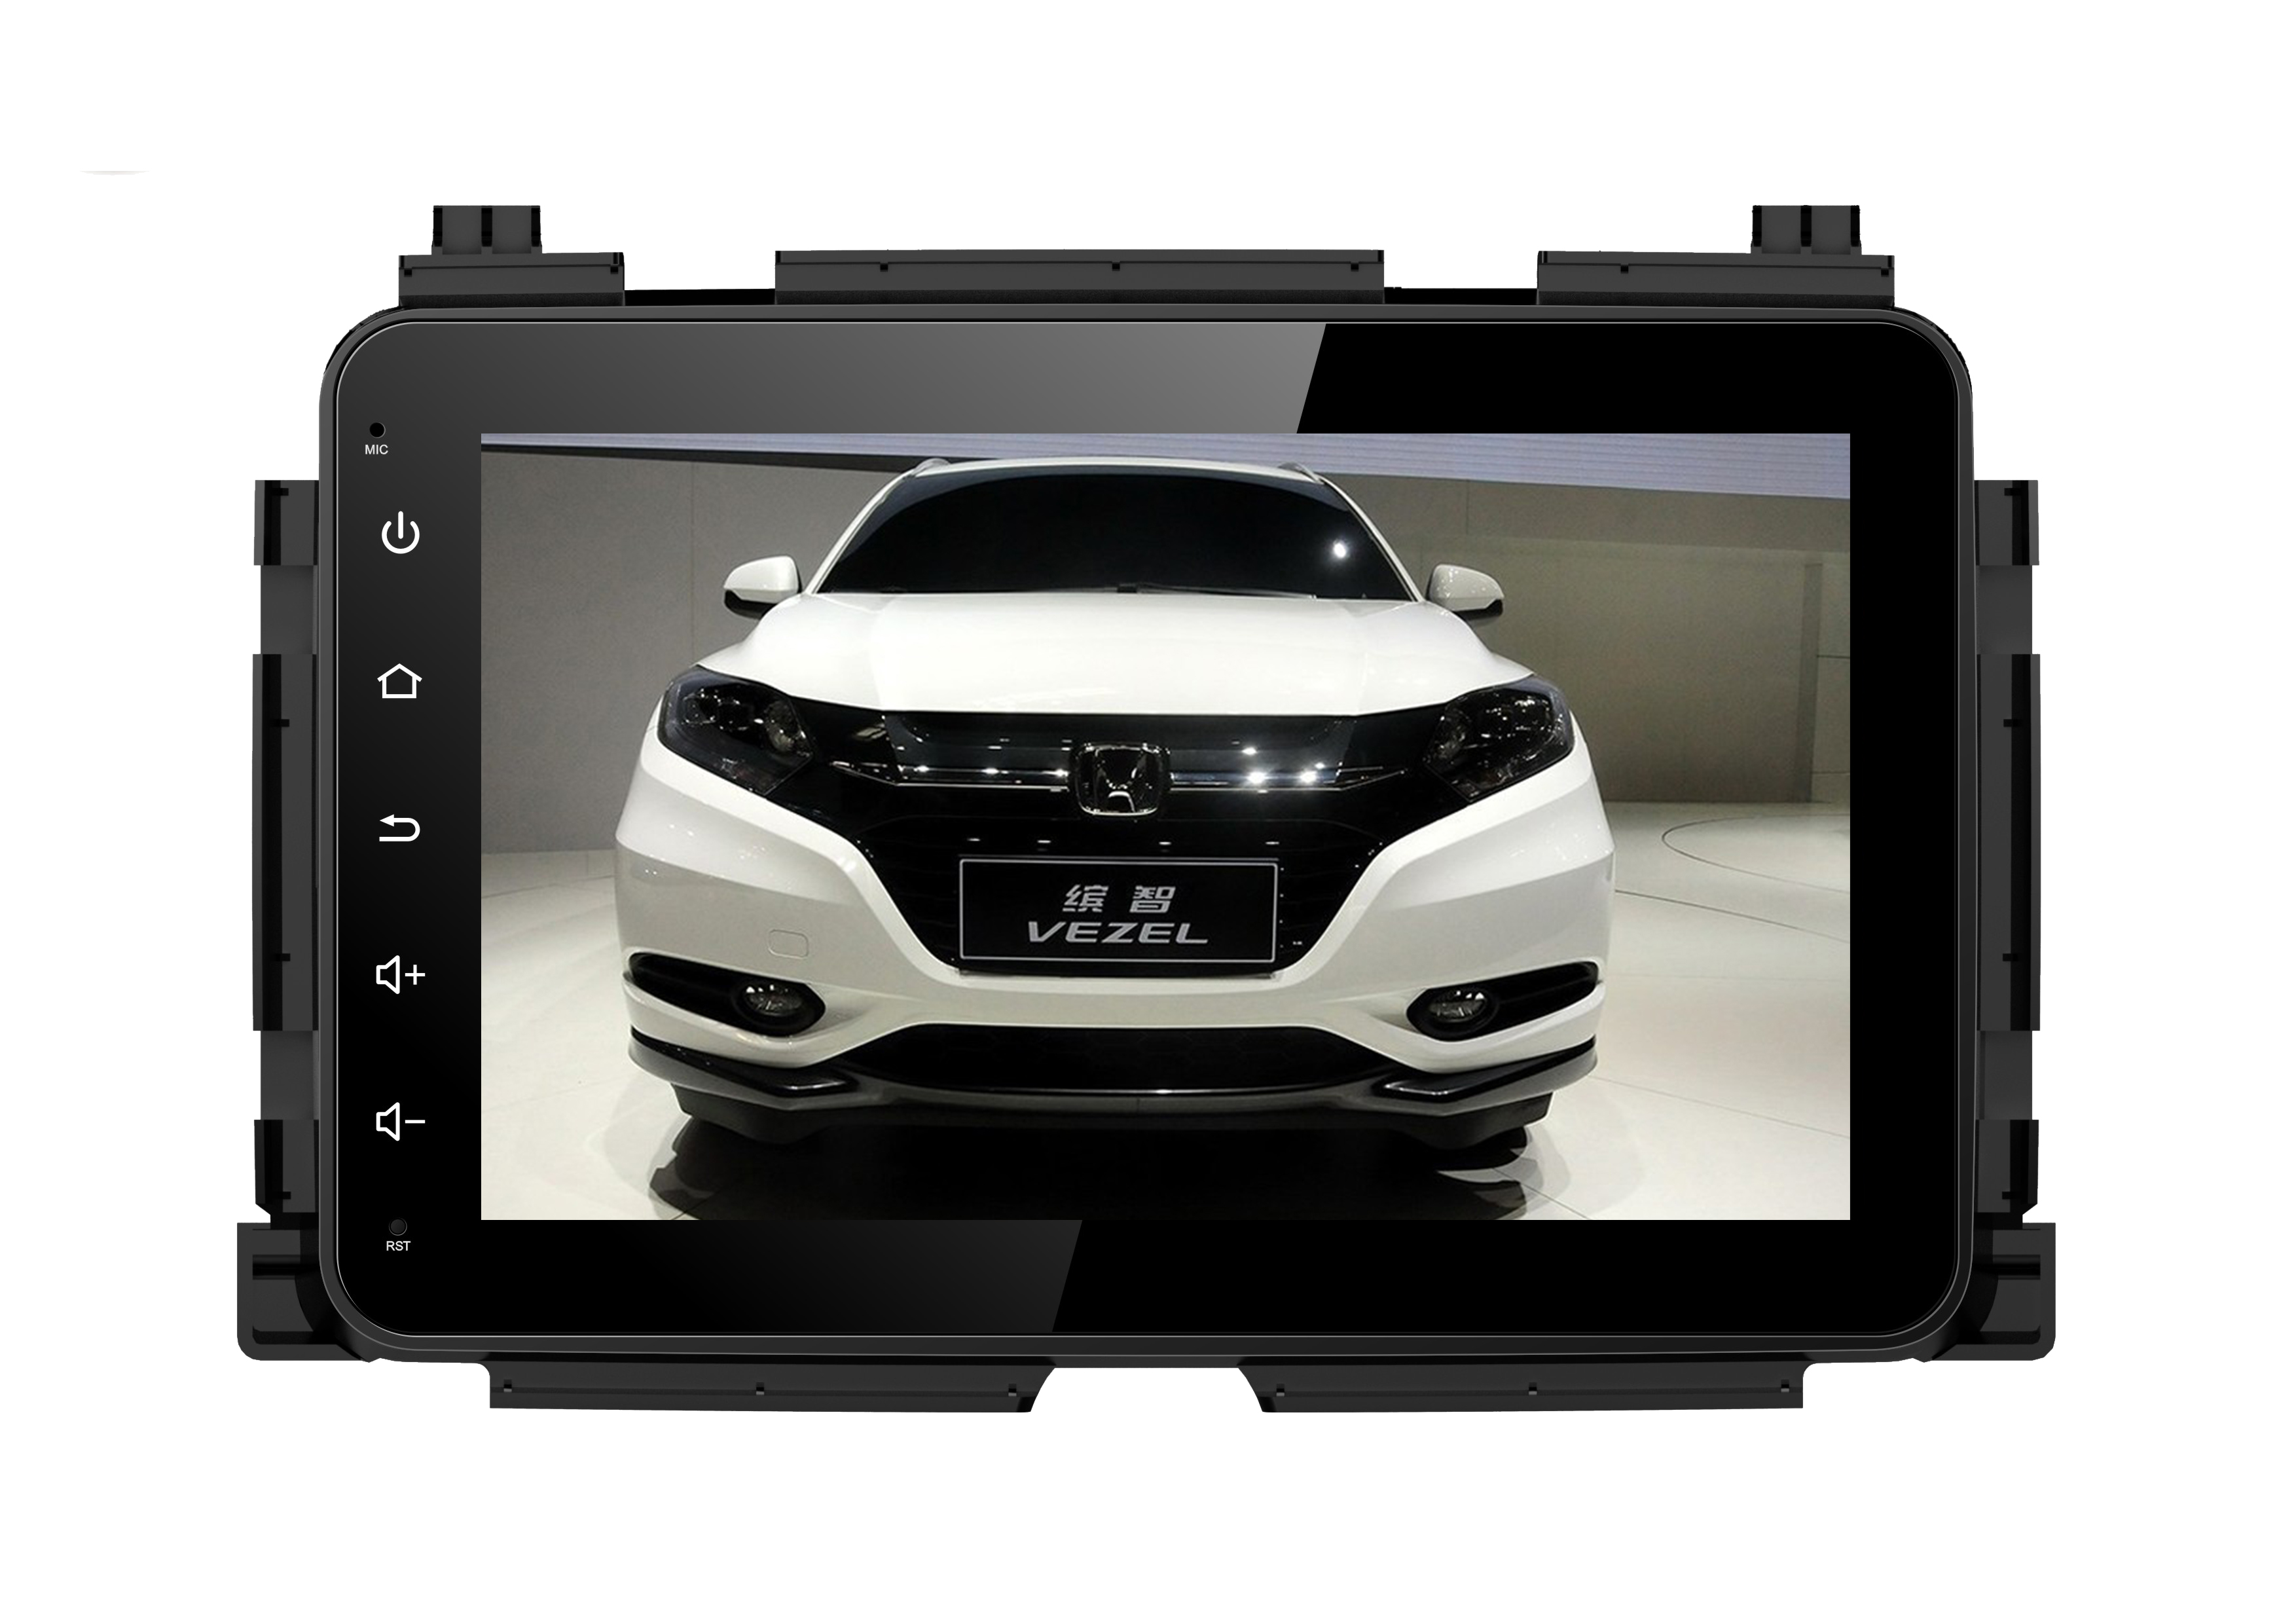 Honda Vezel HR-V 2013 Car GPS Navigation BT Wifi Mirror link Eight/Quad Cores 8'' HD Touch Screen Car PC Android 6.0/7.1 Car stereo radio player head unit RDS